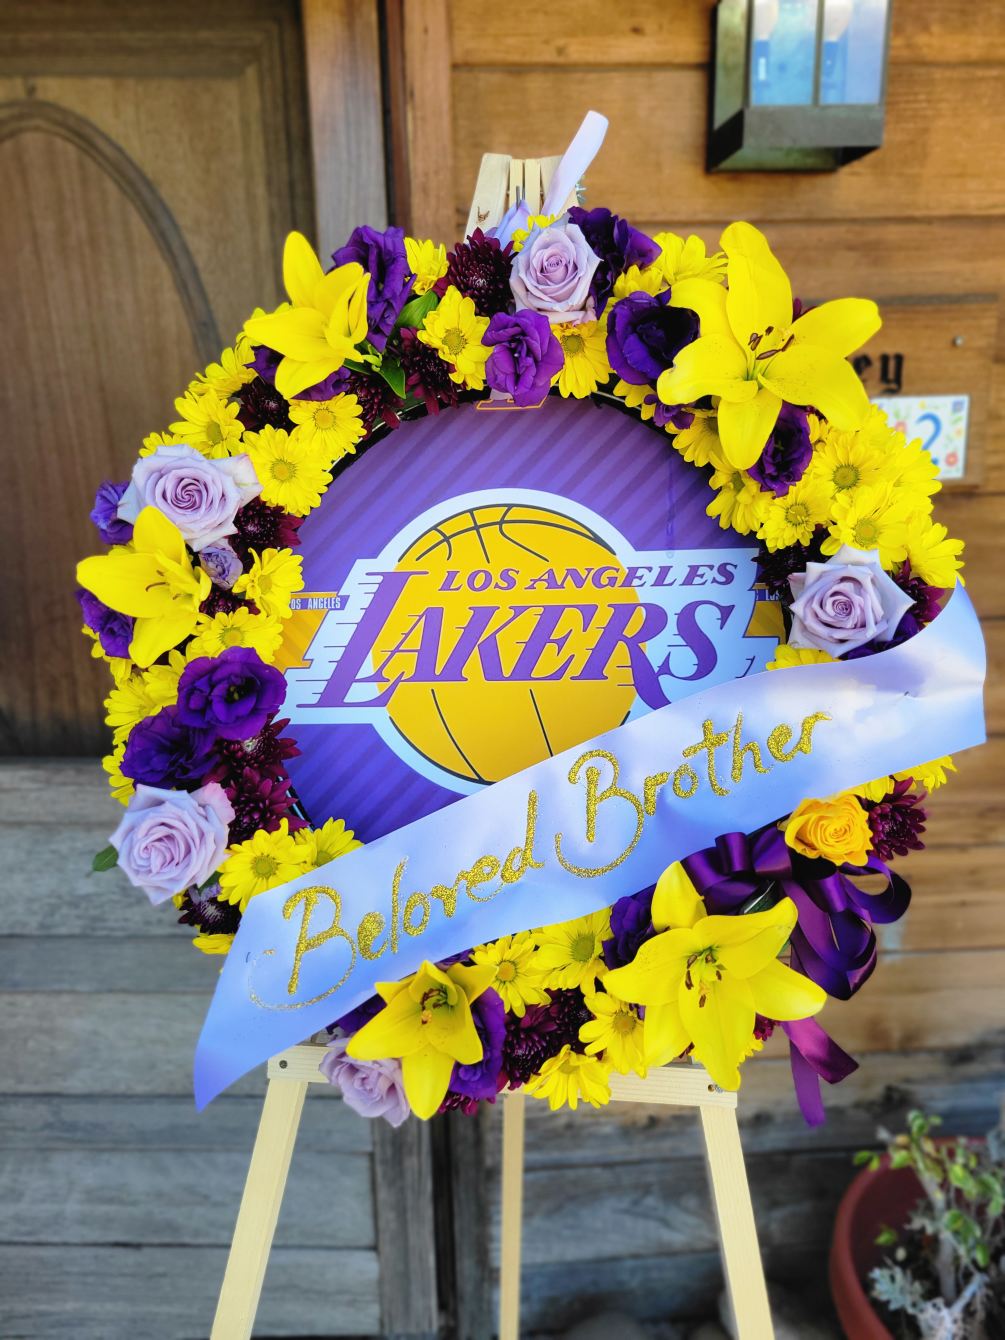 The Lakers Funeral wreath has been a popular choice for funeral services